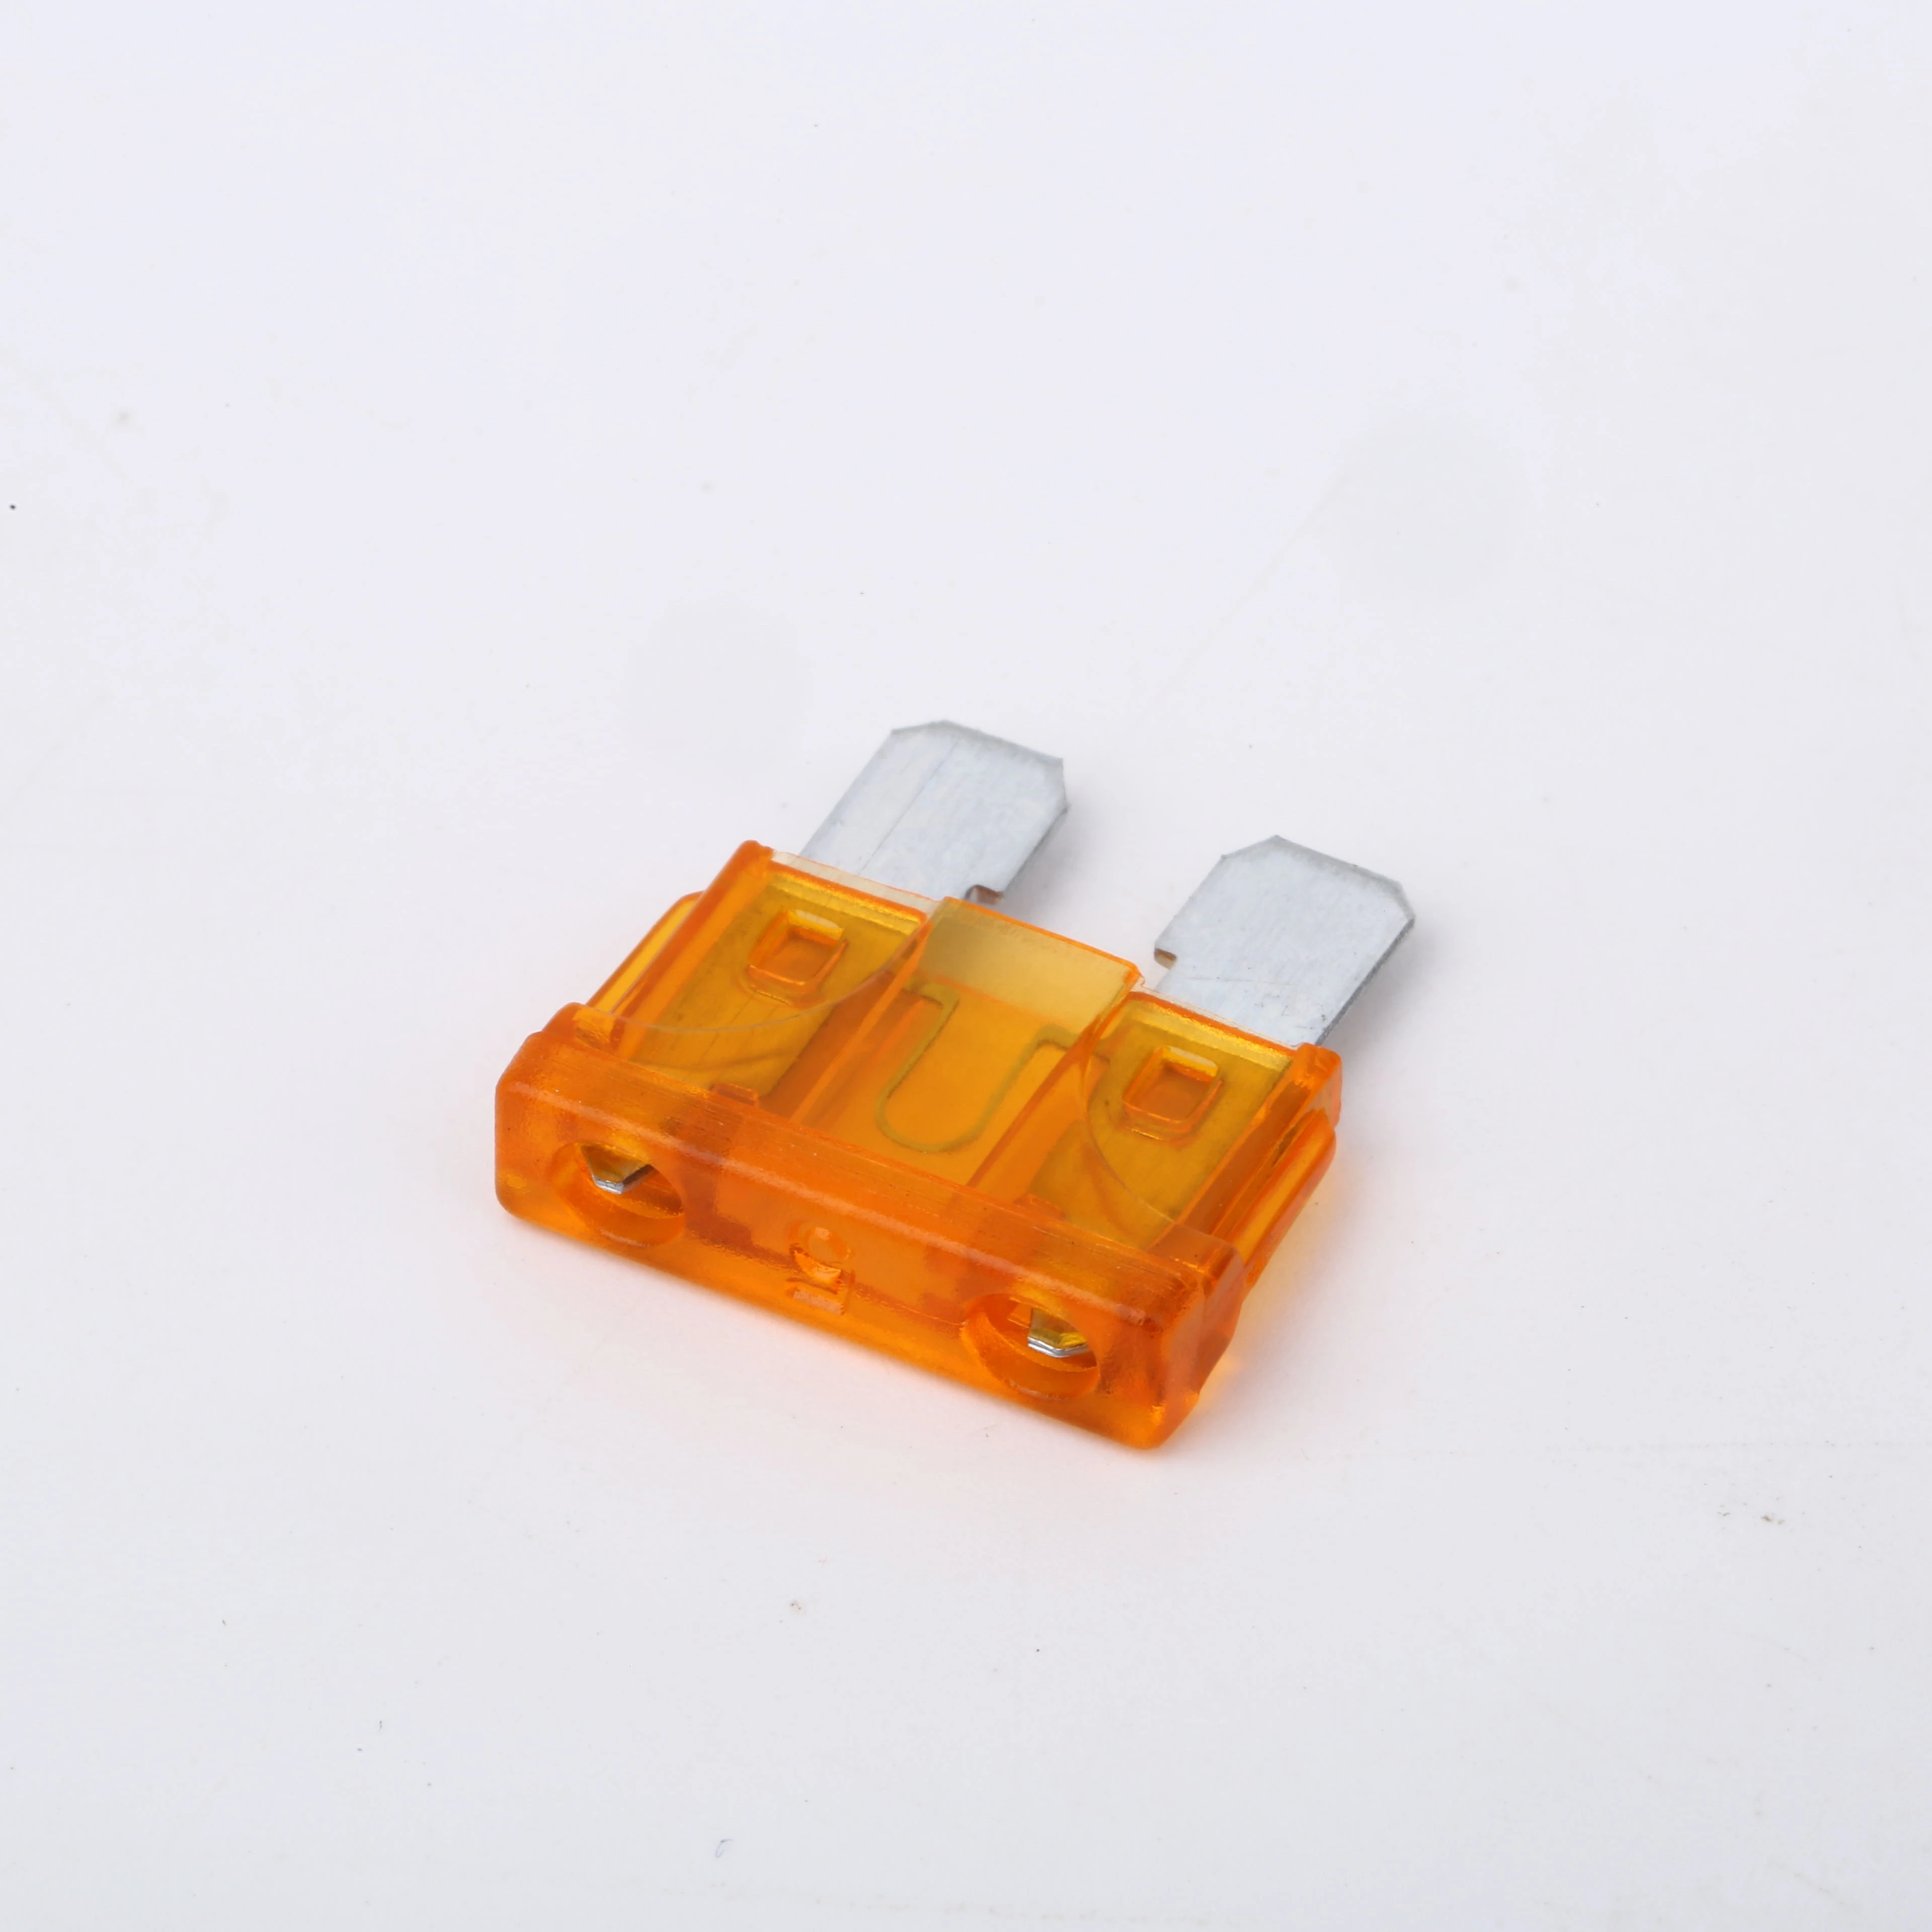 Made in china 30A Medium size Auto fuse, Automotive Fuses Blade,The fuse Insurance insert The insurance of xenon lamp piece